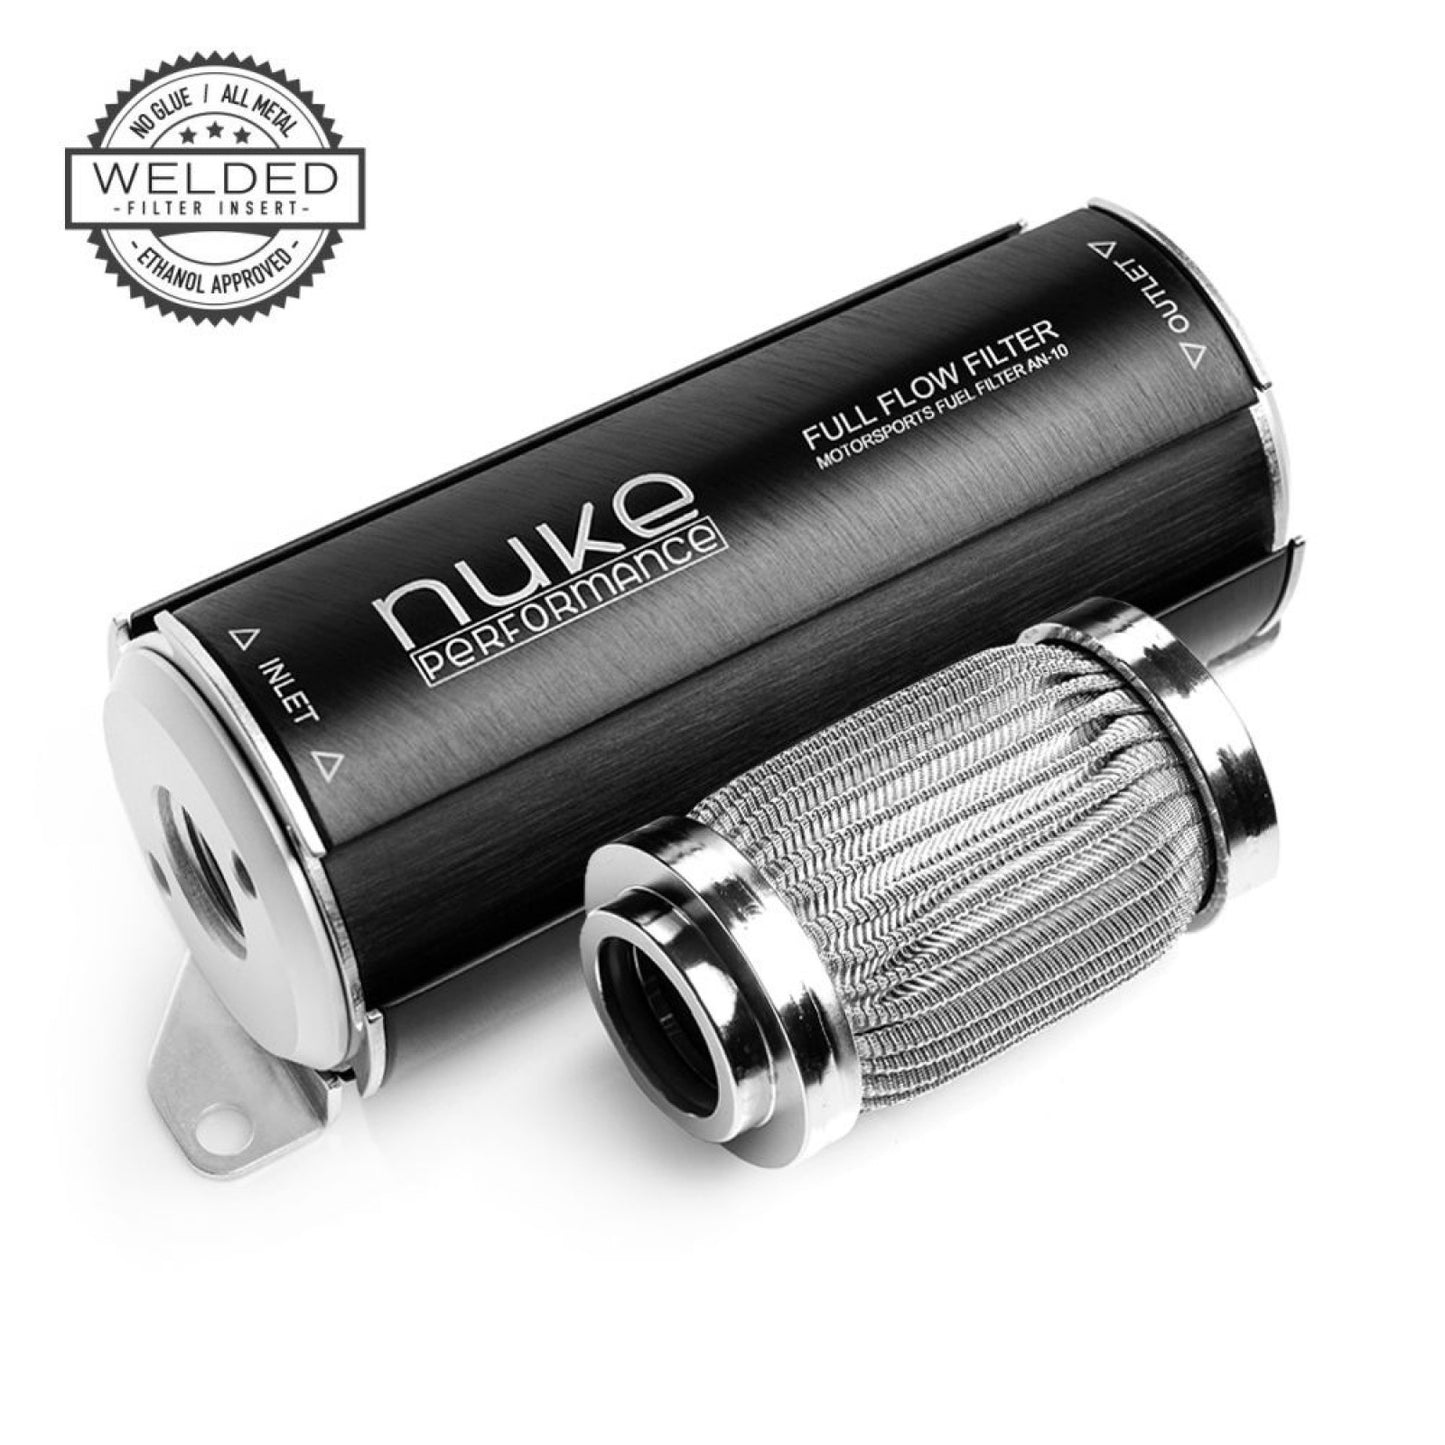 Nuke Performance Fuel Filter 10 micron AN-10 - Welded stainless steel element 200-01-203